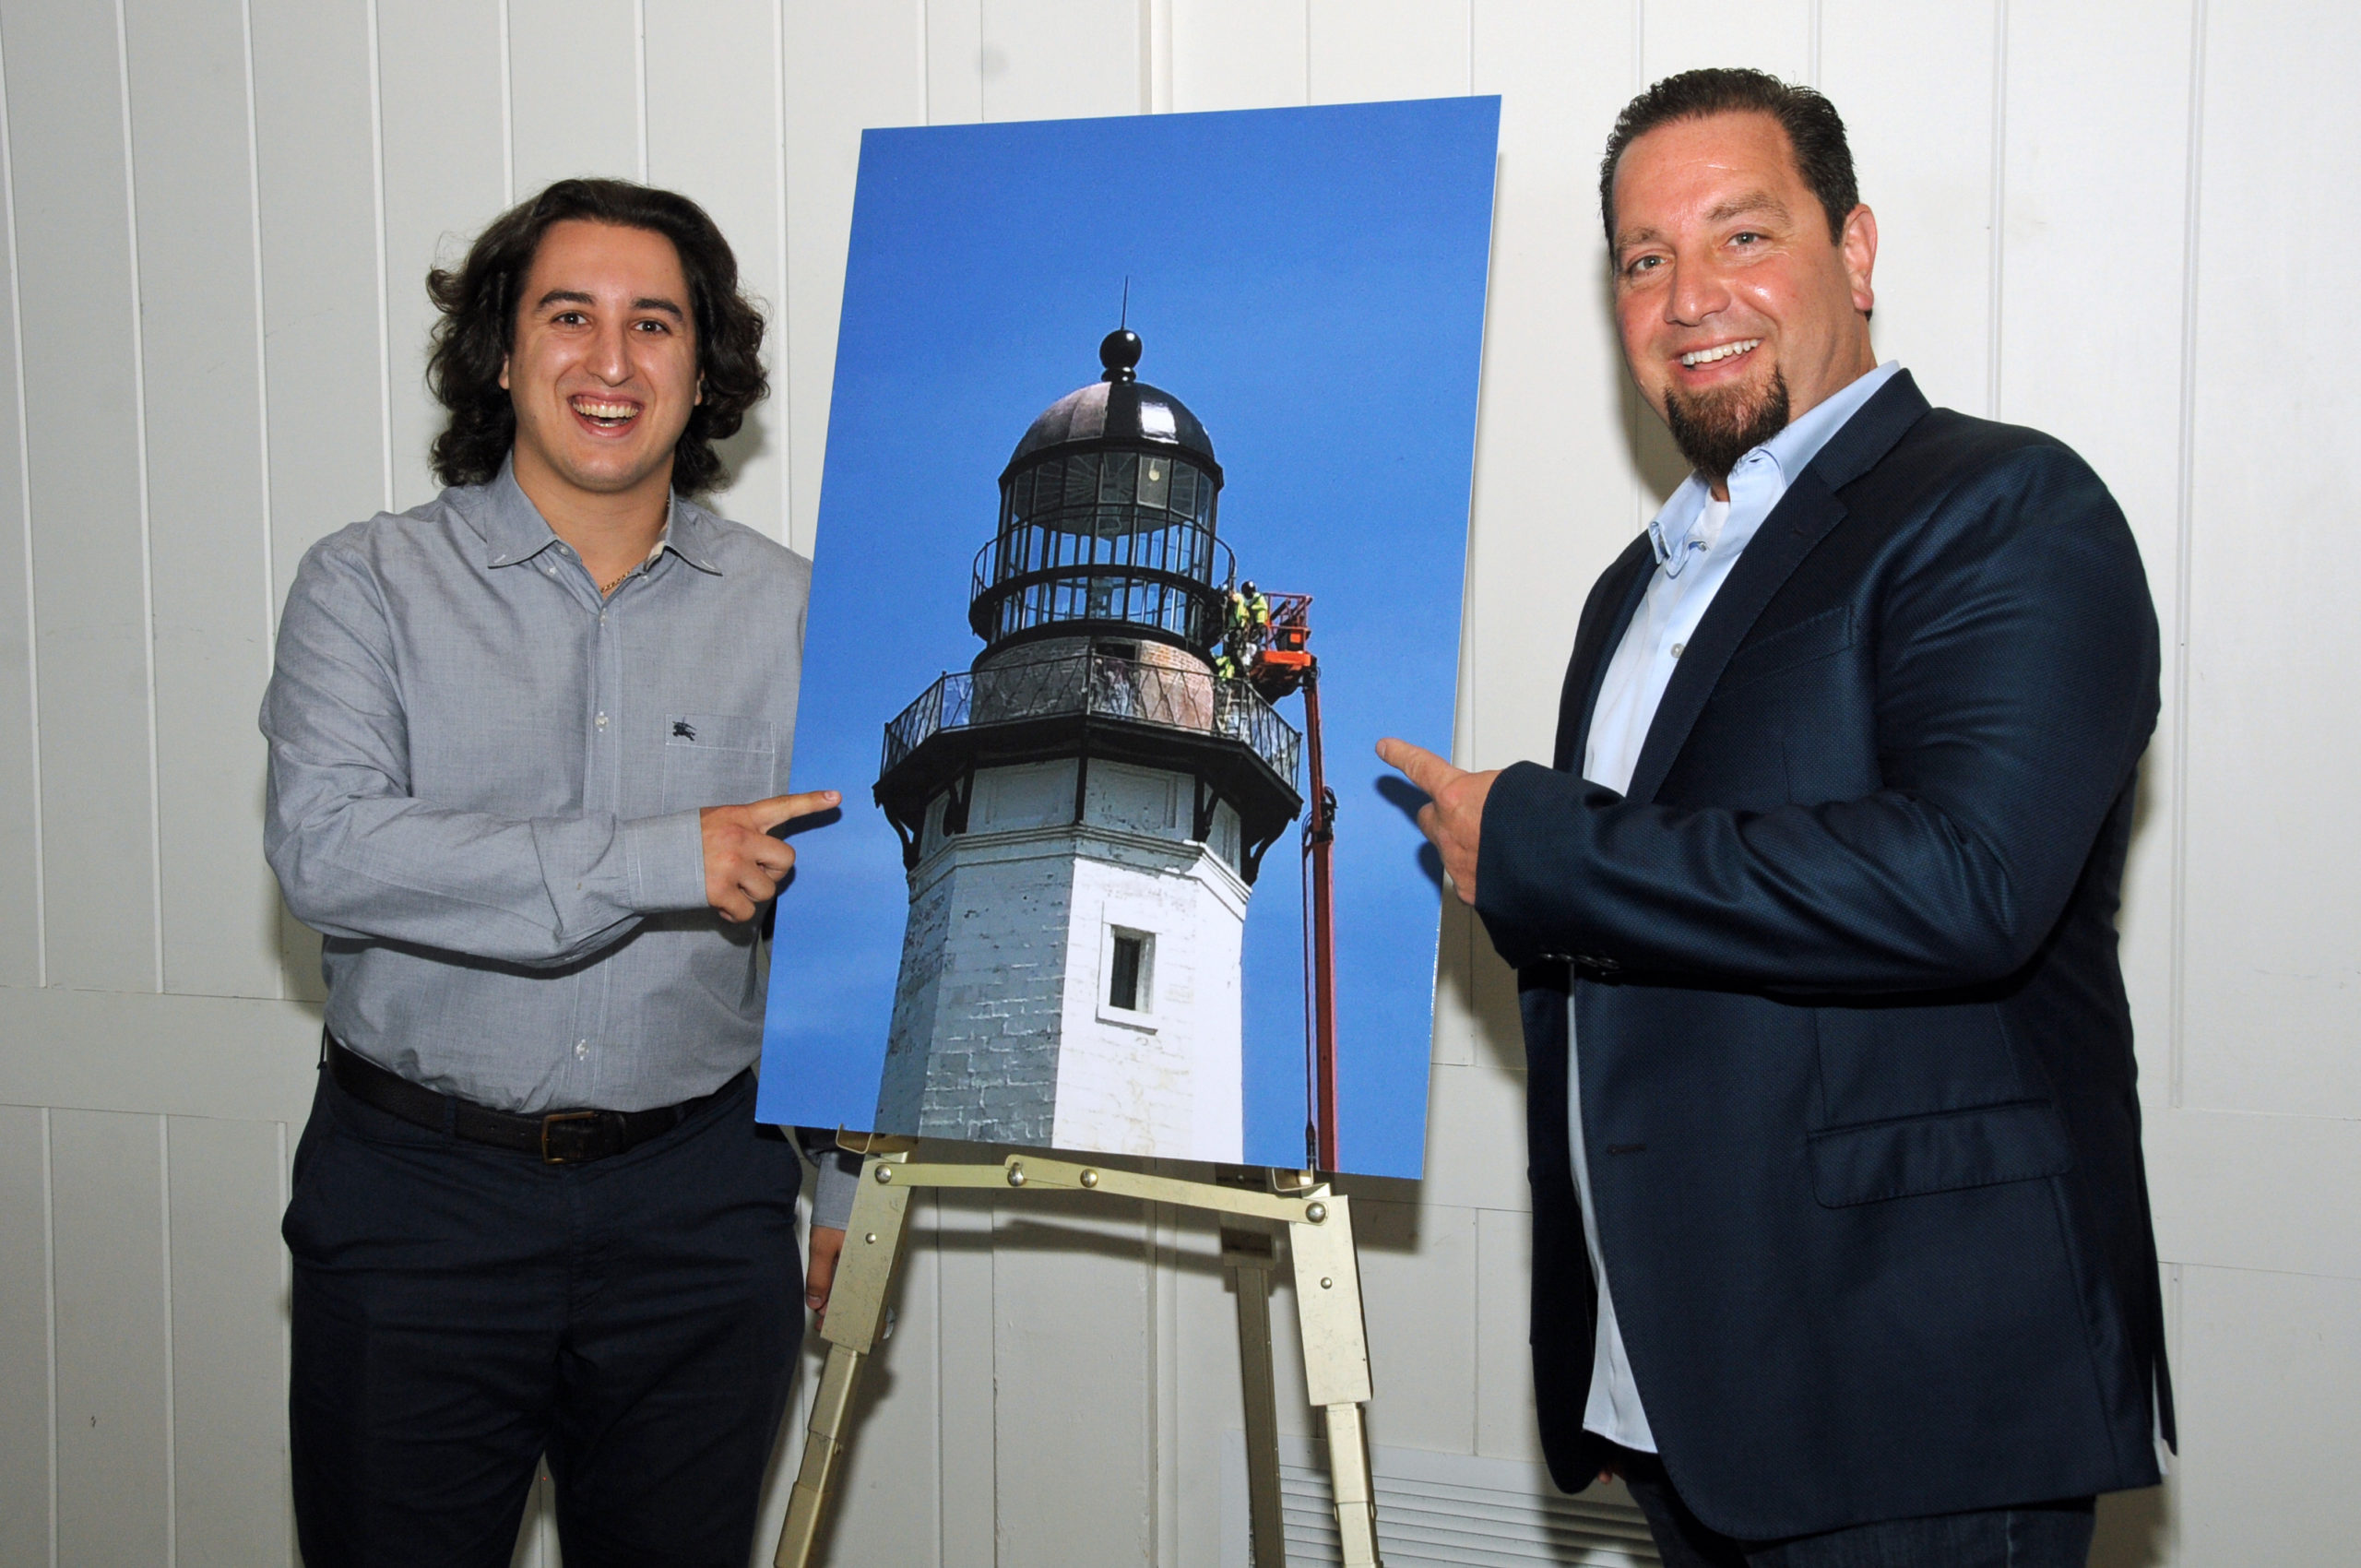 Vincent Amoroso, Jr. and Vincent Amoroso, father and son from Installation Specialties Group the company that is working on the lighthouse restoration at the Montauk Historical Society's cocktail party on July 14 to launch a public capital campaign for the Montauk Point Lighthouse restoration.  Work on restoring the tower began in 2019, and is scheduled to be completed by next year.     RICHARD LEWIN